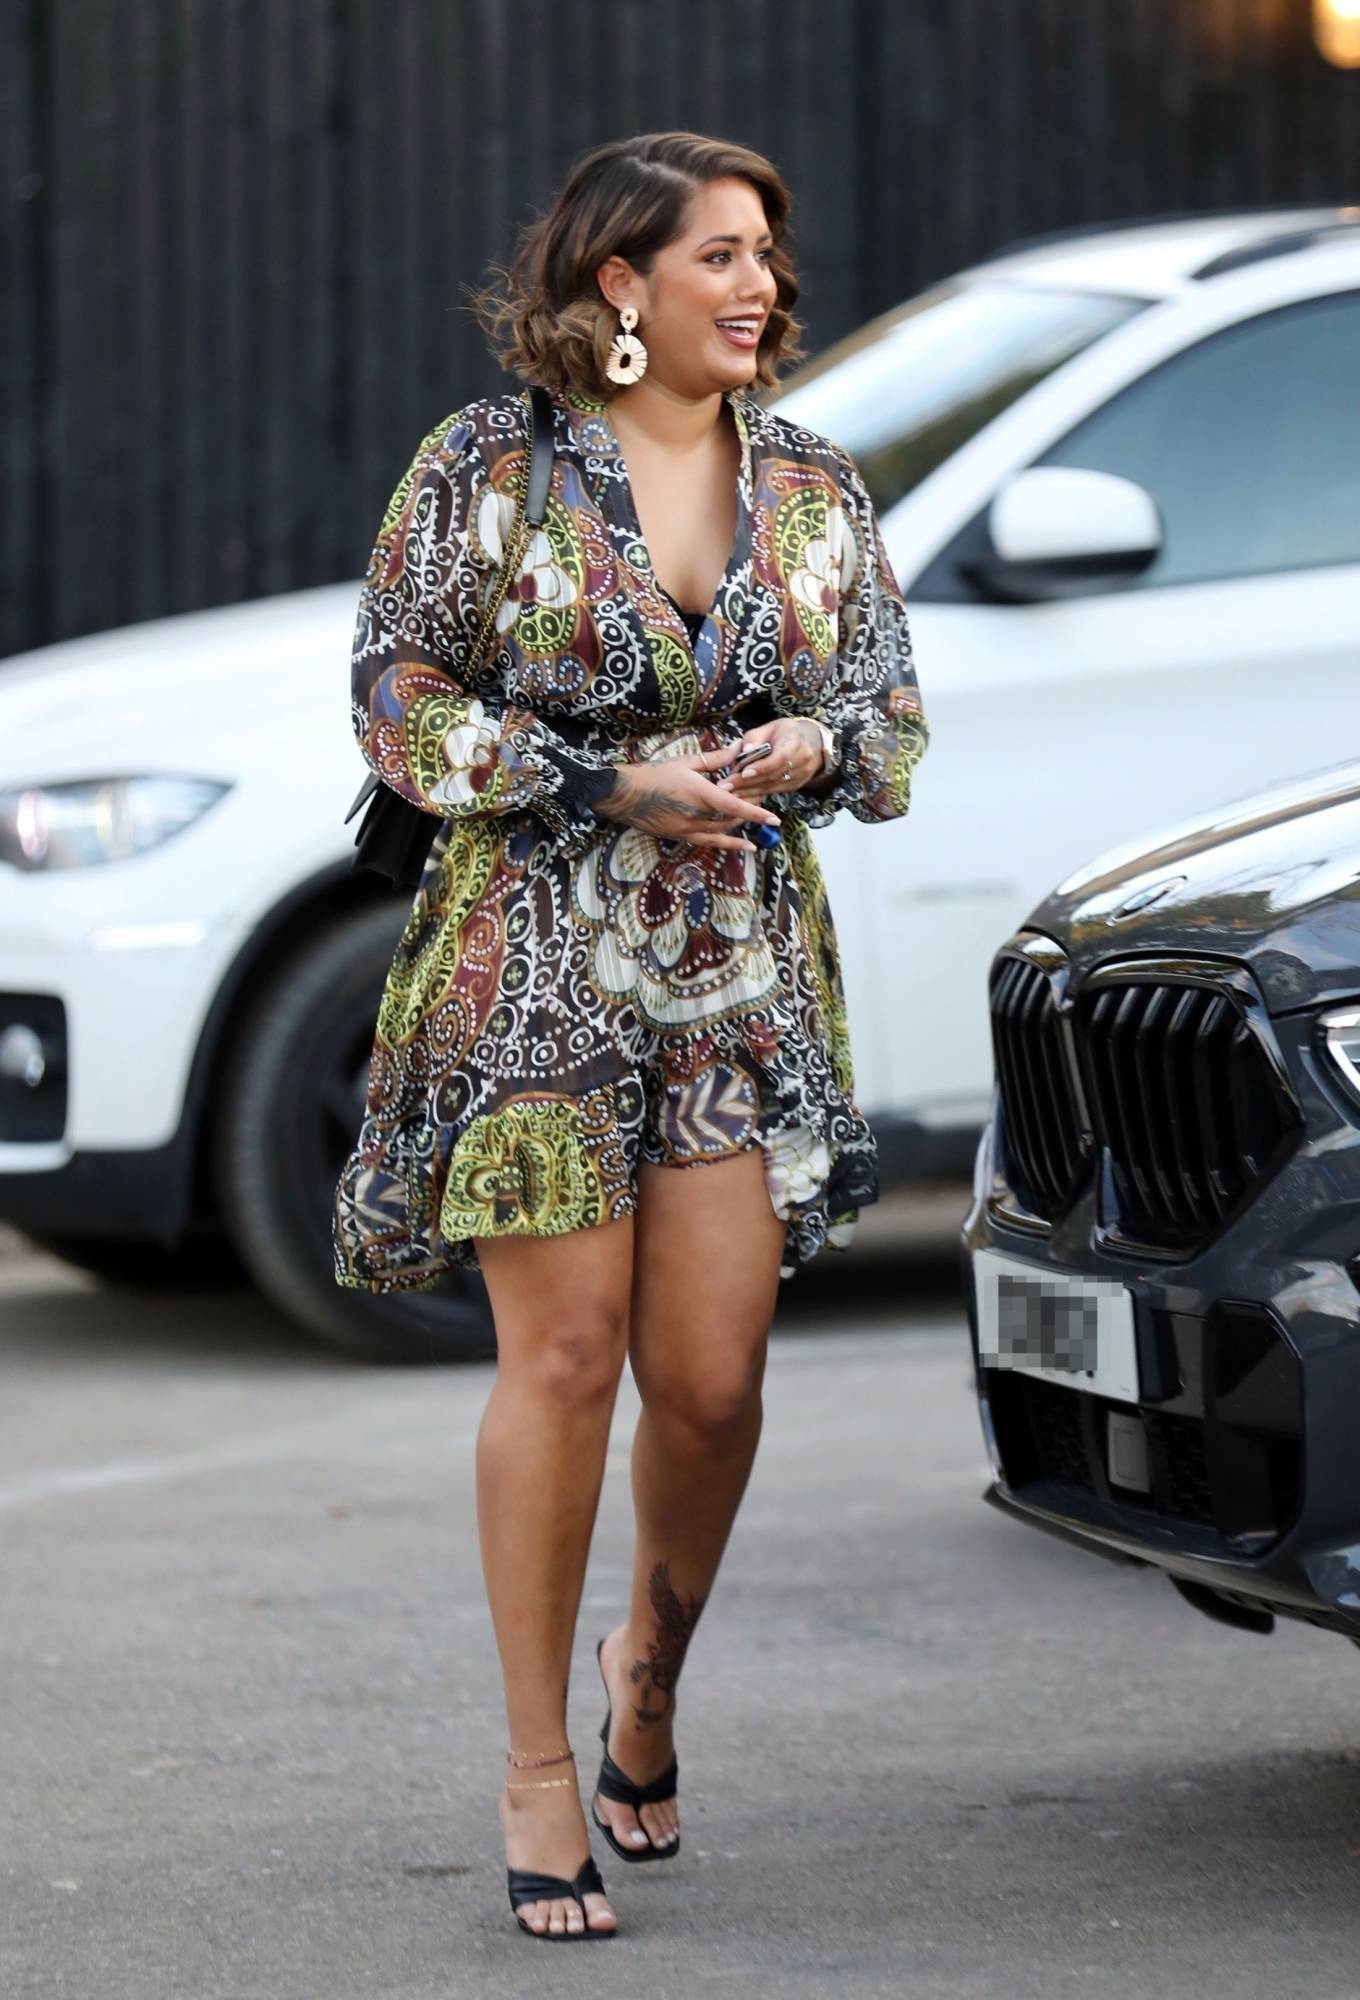 Malin Andersson 2021 : Malin Andersson – Out in her patterned floral dress in Essex-23